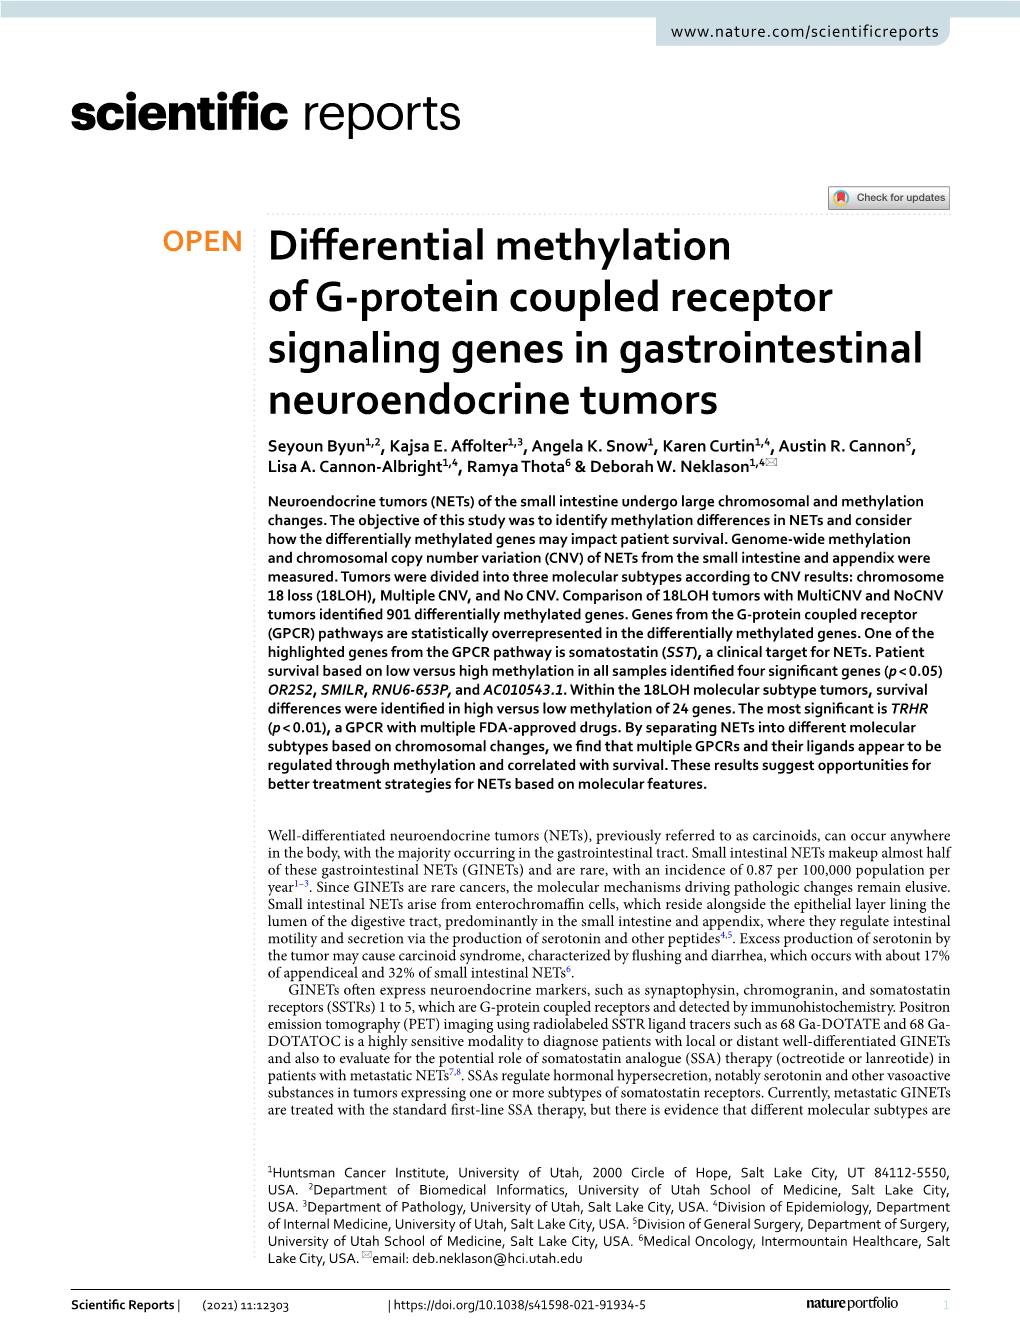 Differential Methylation of G-Protein Coupled Receptor Signaling Genes In